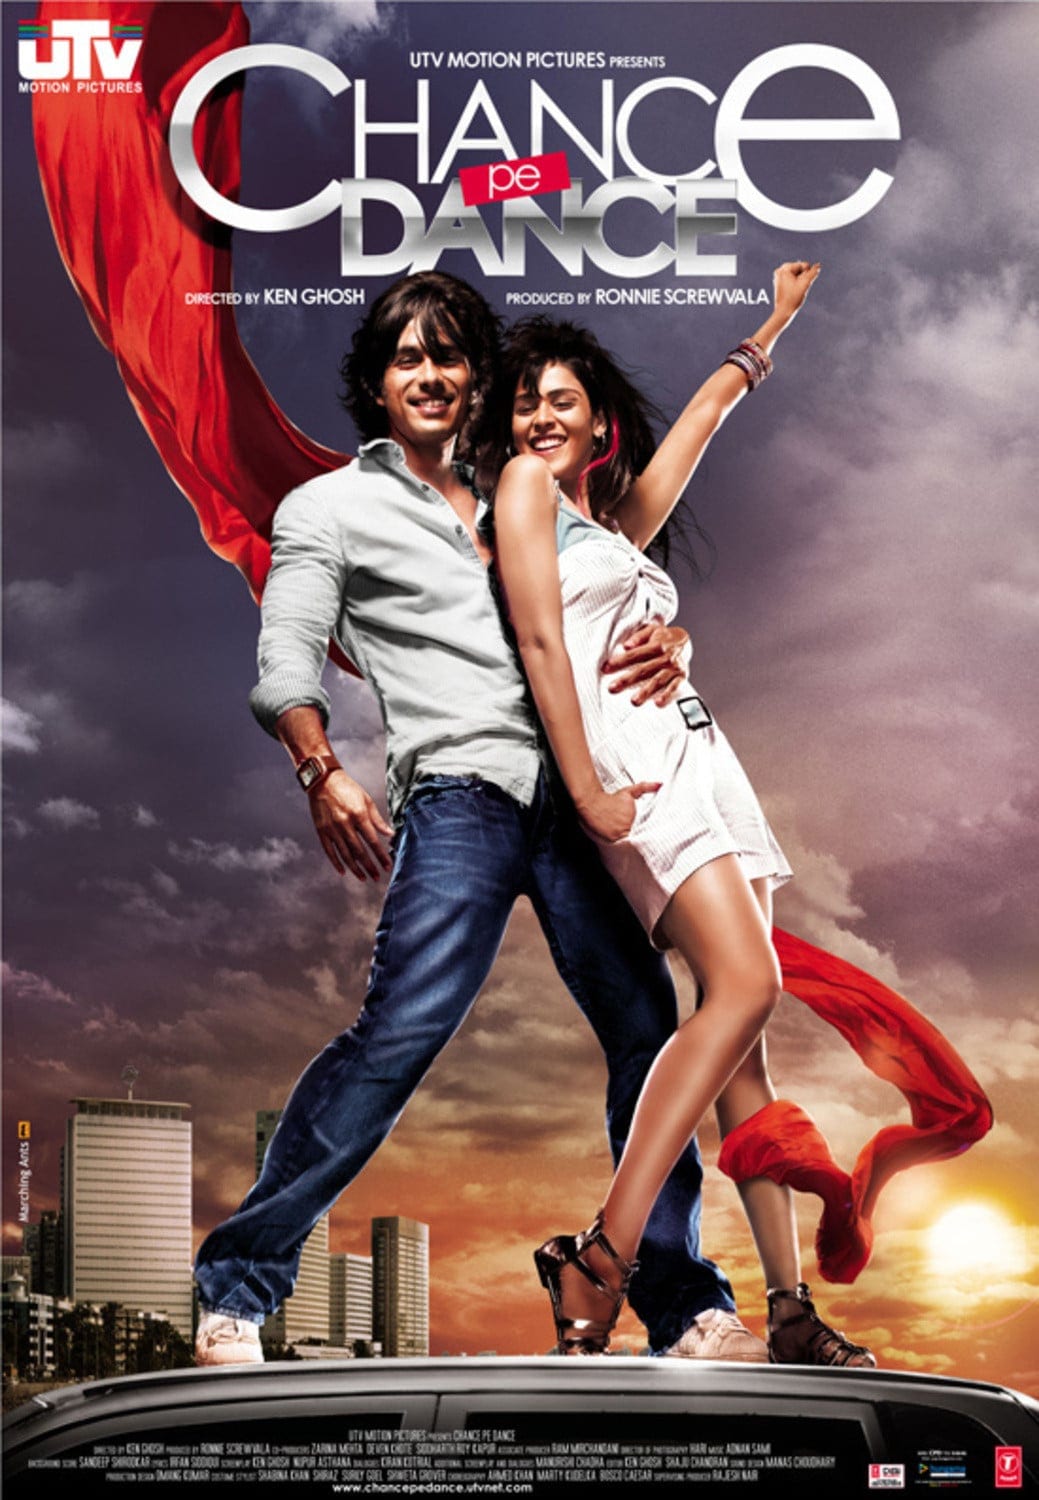 Poster for the movie "Chance Pe Dance"